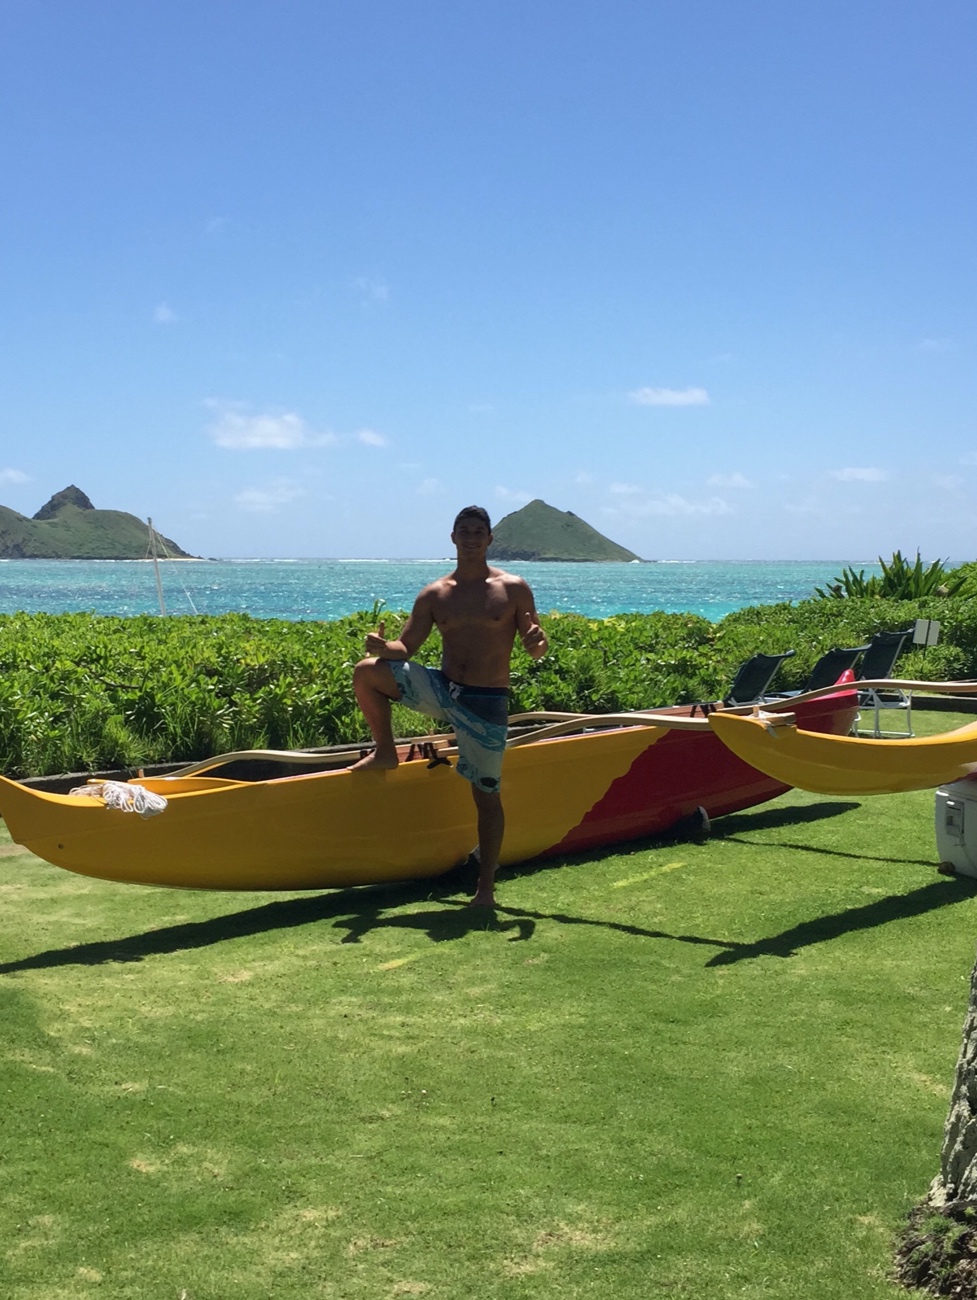 Hopena with the Hōkū Alakaʻi. “A big goal of mine was to finish my canoe, which I did in 2018,” he says. “That’s something I look back at as a significant moment in my life.” Eventually, he hopes to sail it to the outer Hawaiian islands. 